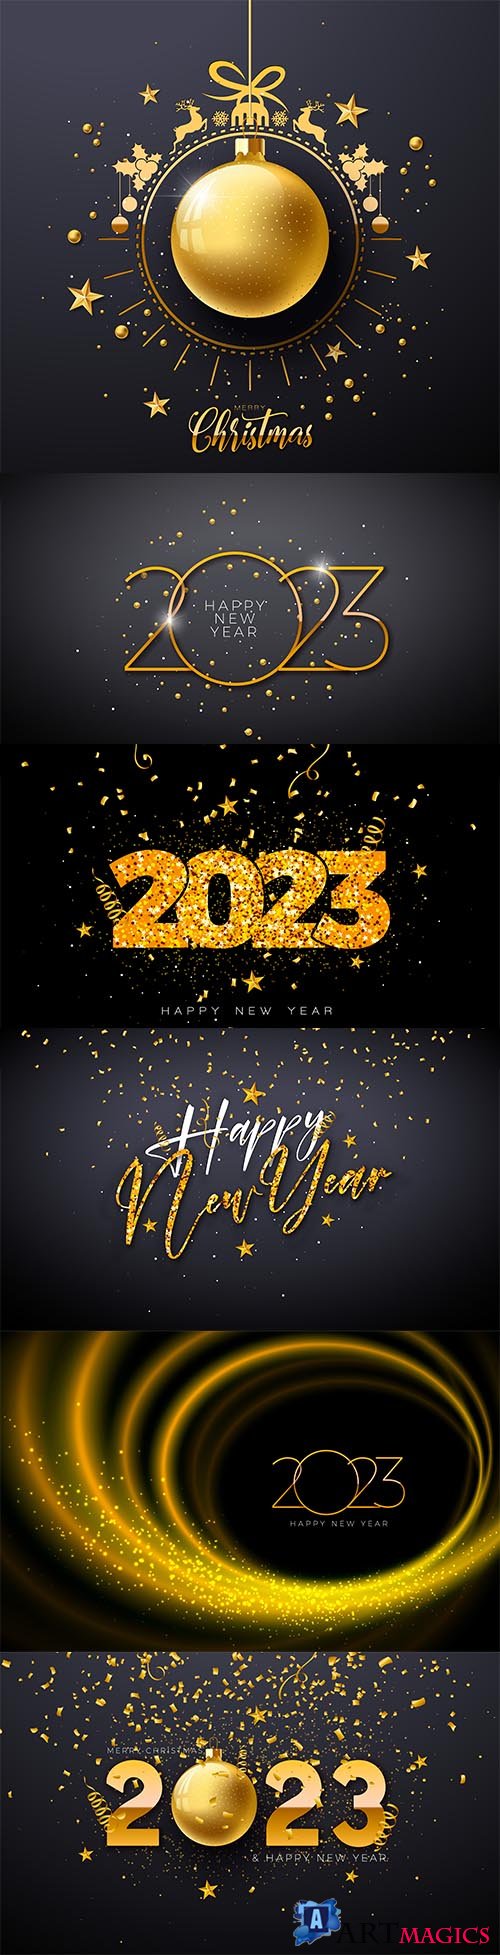 Vector happy new year 2023 illustration with gold lettering